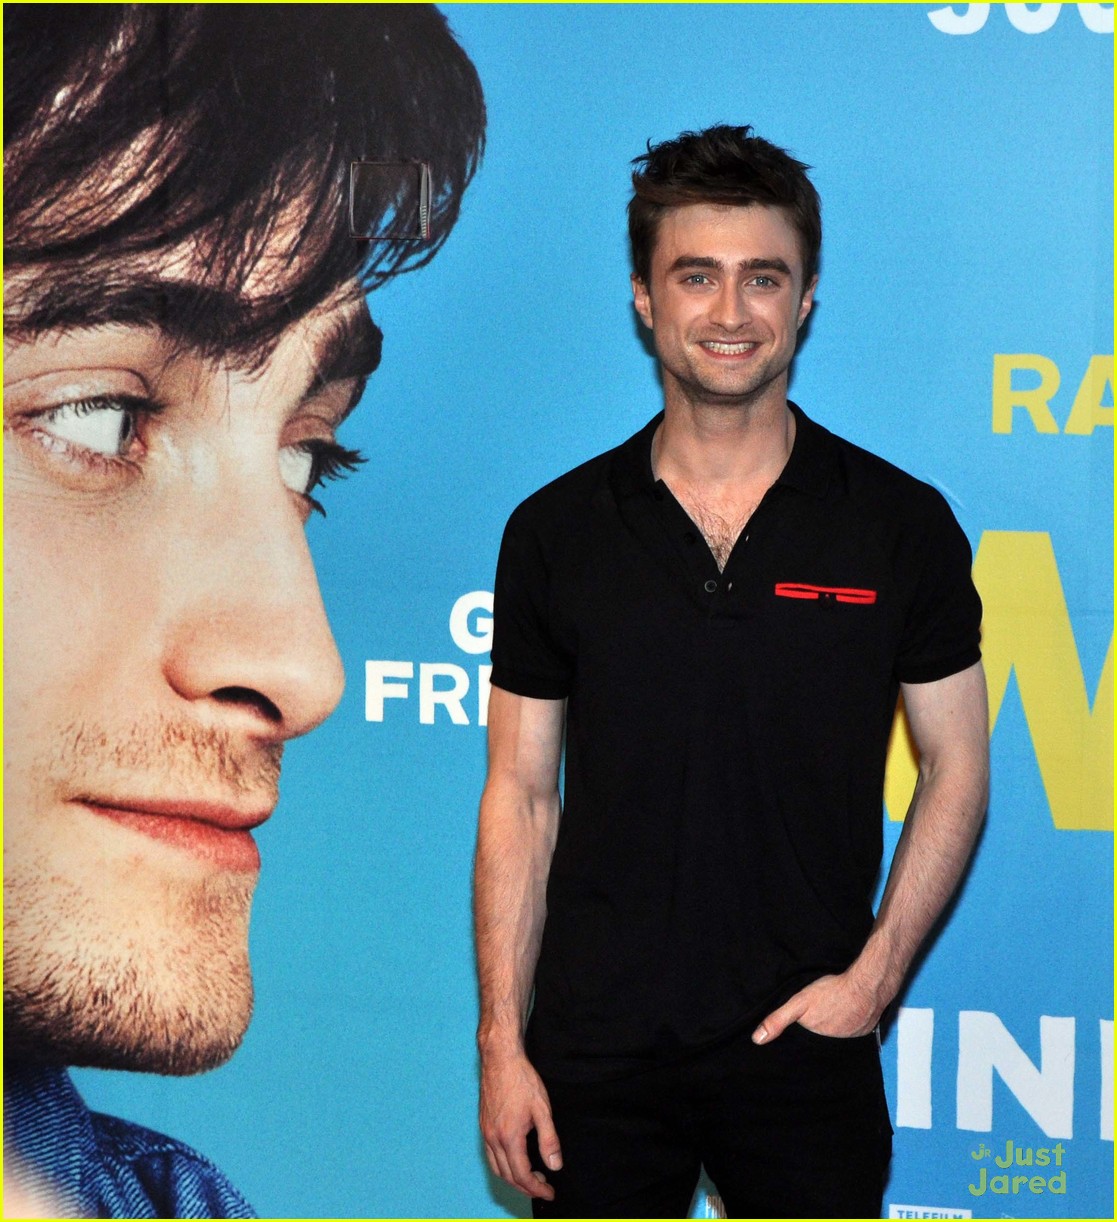 daniel radcliffe pose with fans what if dublin 23